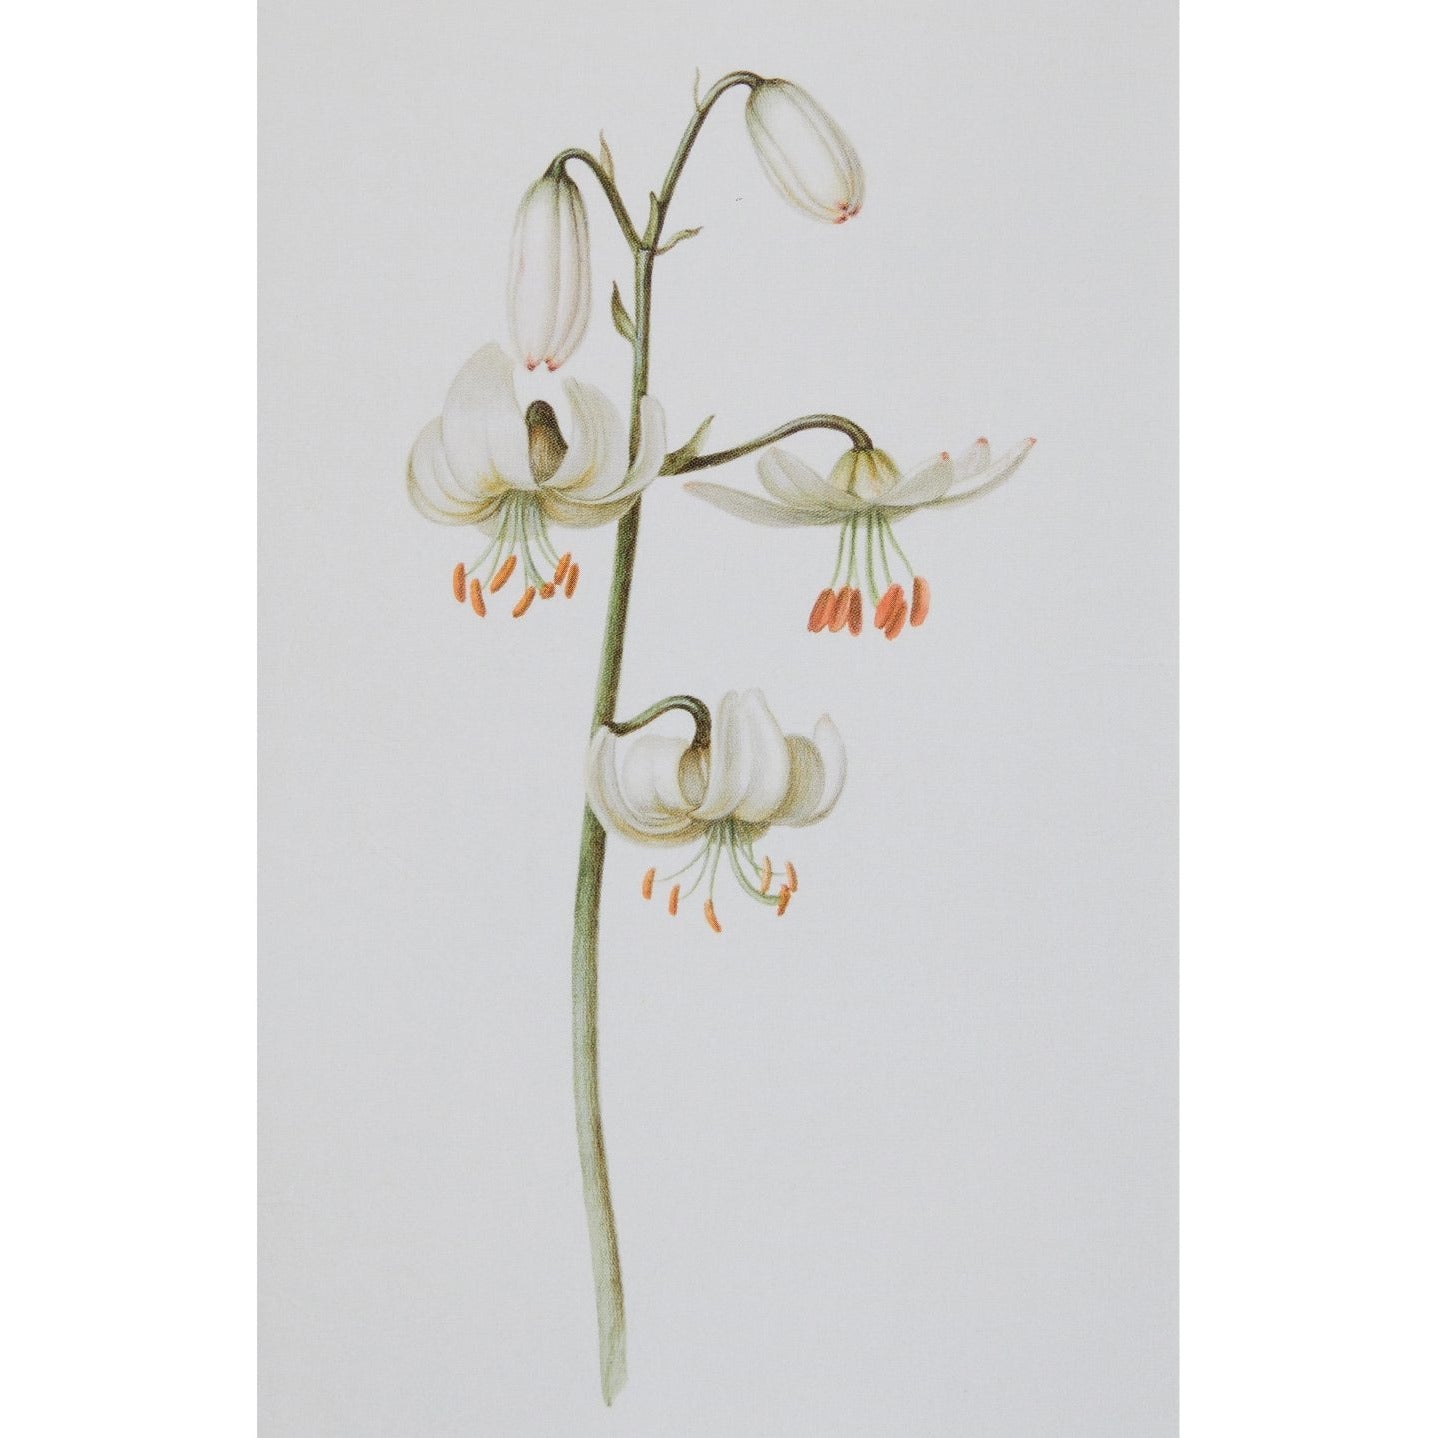 Notecard - A White Lily by Pieter Withoos. From the Broughton Collection of the Fitzwilliam Museum, brought to you by CuratingCambridge.co.uk